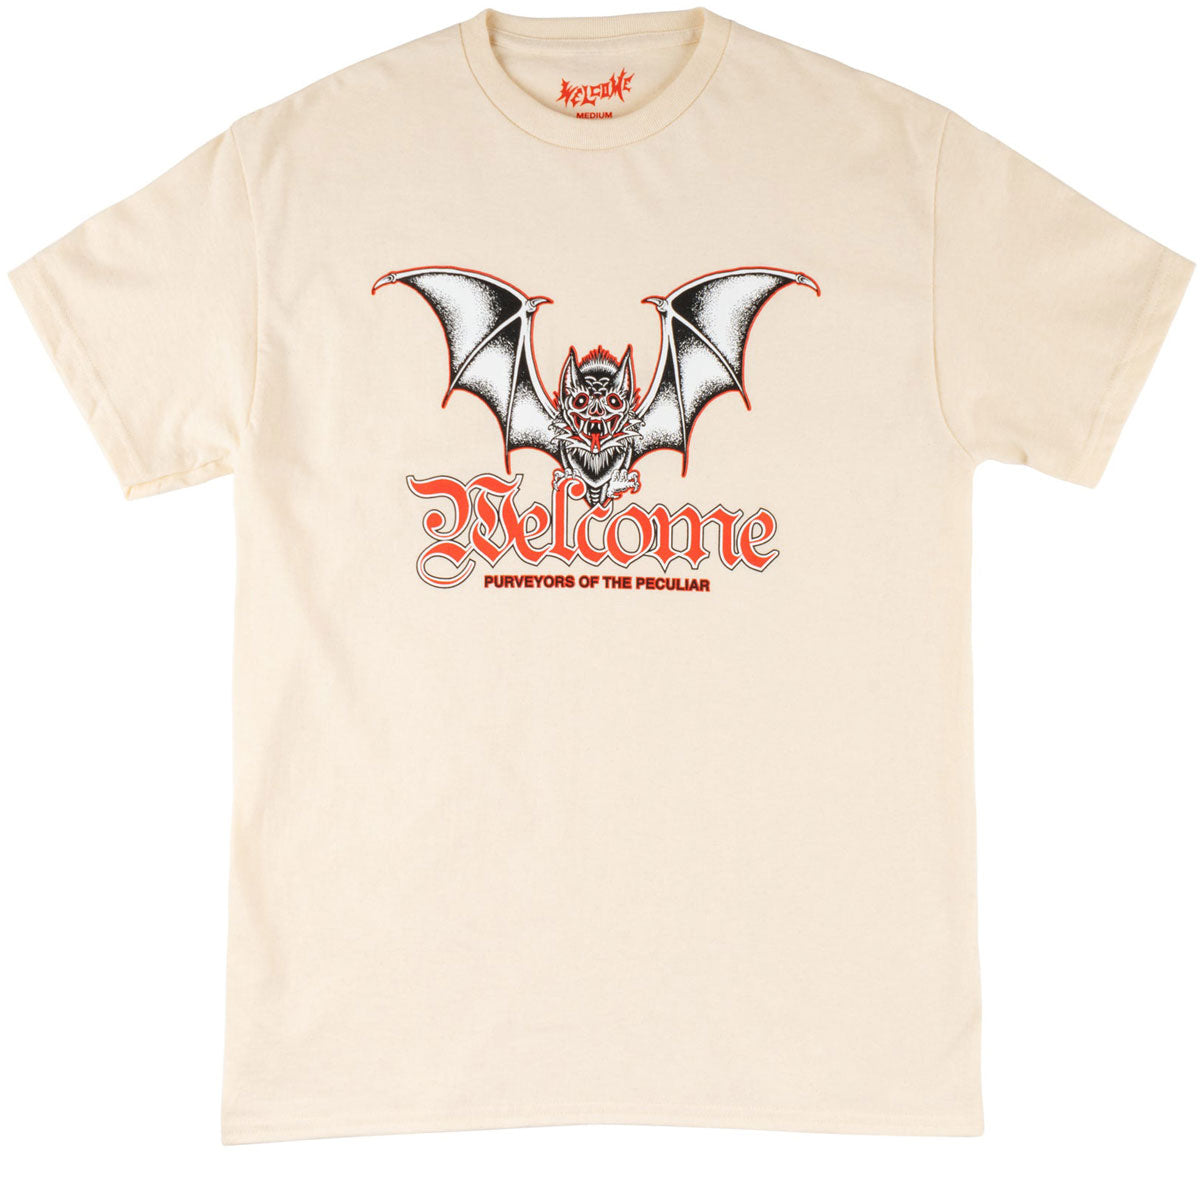 Welcome Nocturnal T-Shirt - Bone image 1